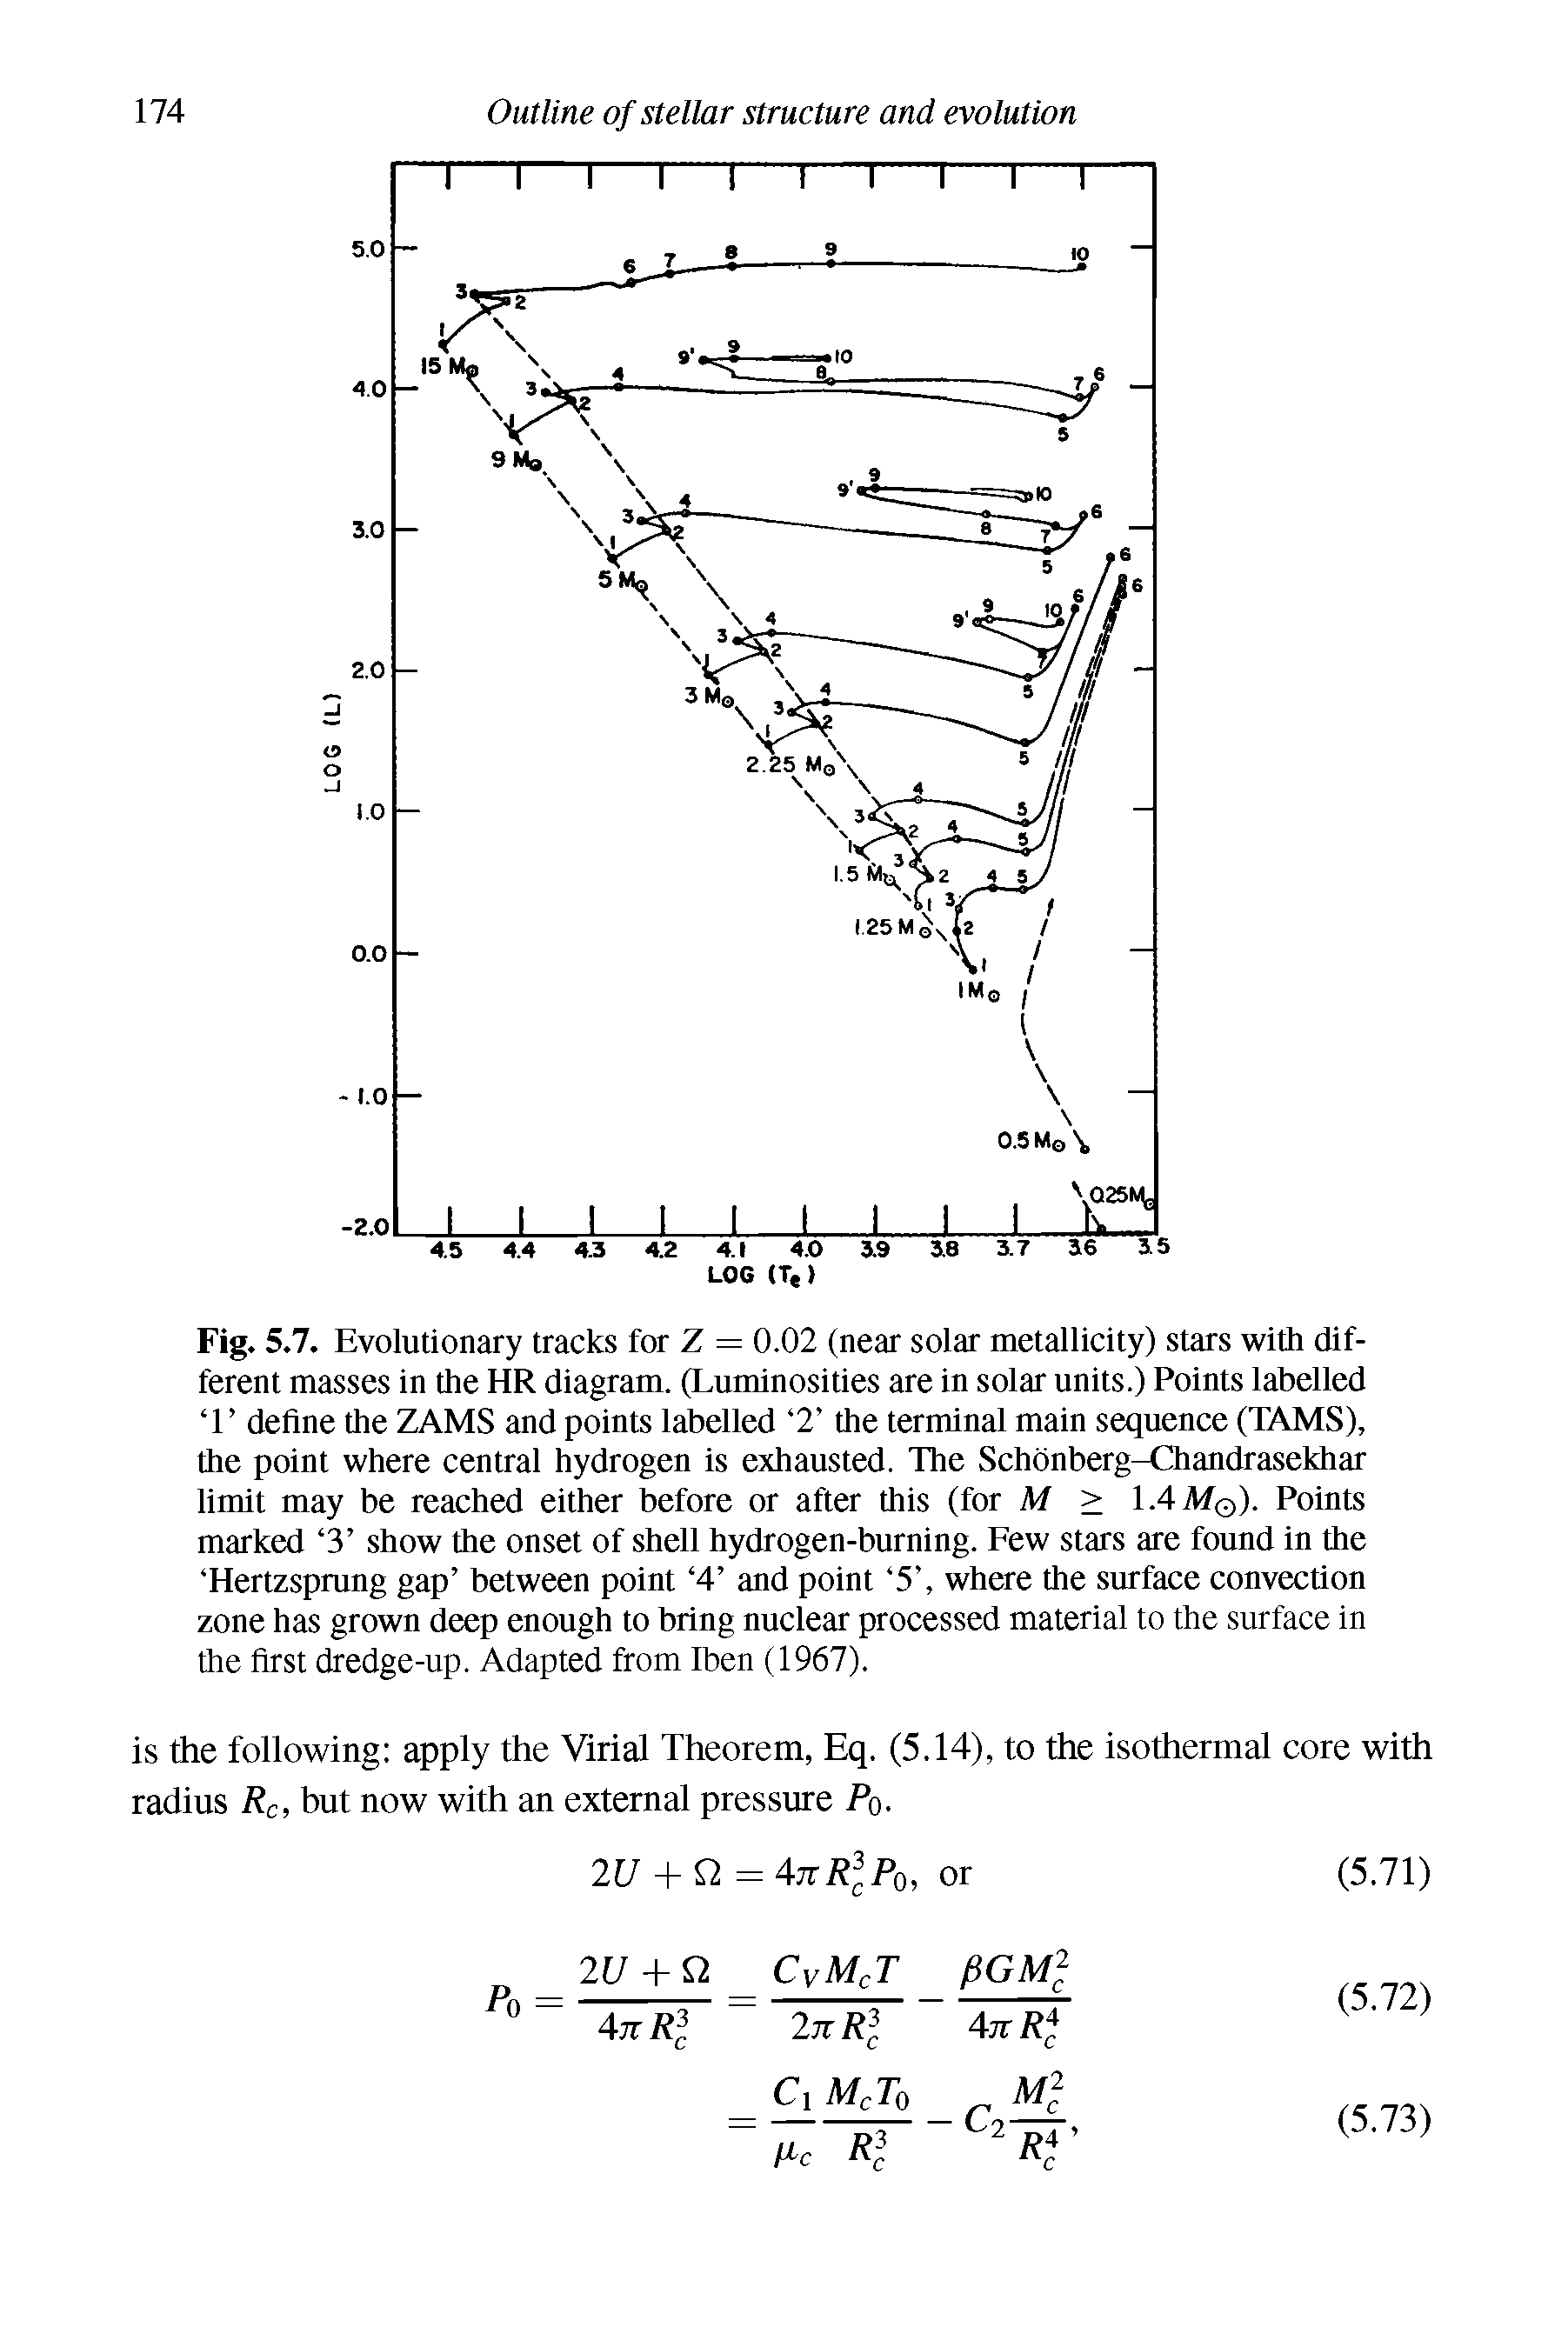 Fig. 5.7. Evolutionary tracks for Z = 0.02 (near solar metallicity) stars with different masses in the HR diagram. (Luminosities are in solar units.) Points labelled 1 define the ZAMS and points labelled 2 the terminal main sequence (TAMS), the point where central hydrogen is exhausted. The Schonberg-Chandrasekhar limit may be reached either before or after this (for M > 1.4 Af0). Points marked 3 show the onset of shell hydrogen-burning. Few stars are found in the Hertzsprung gap between point 4 and point 5 , where the surface convection zone has grown deep enough to bring nuclear processed material to the surface in the first dredge-up. Adapted from Iben (1967).